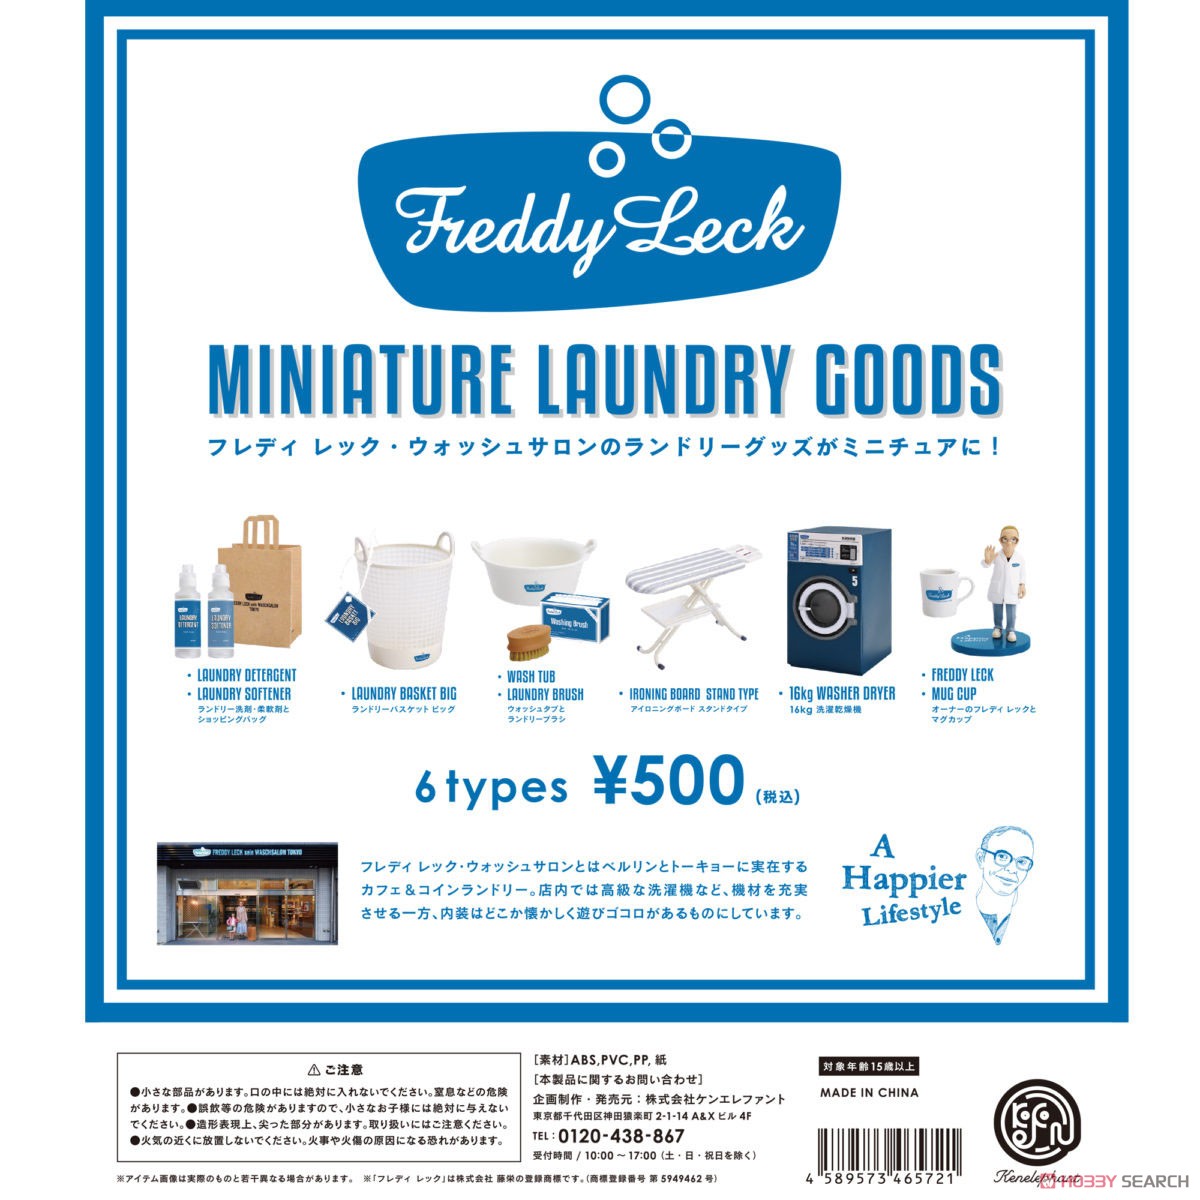 FREDDY LECK MINIATURE LAUNDRY GOODS BOX版 (9個セット) (完成品) その他の画像1